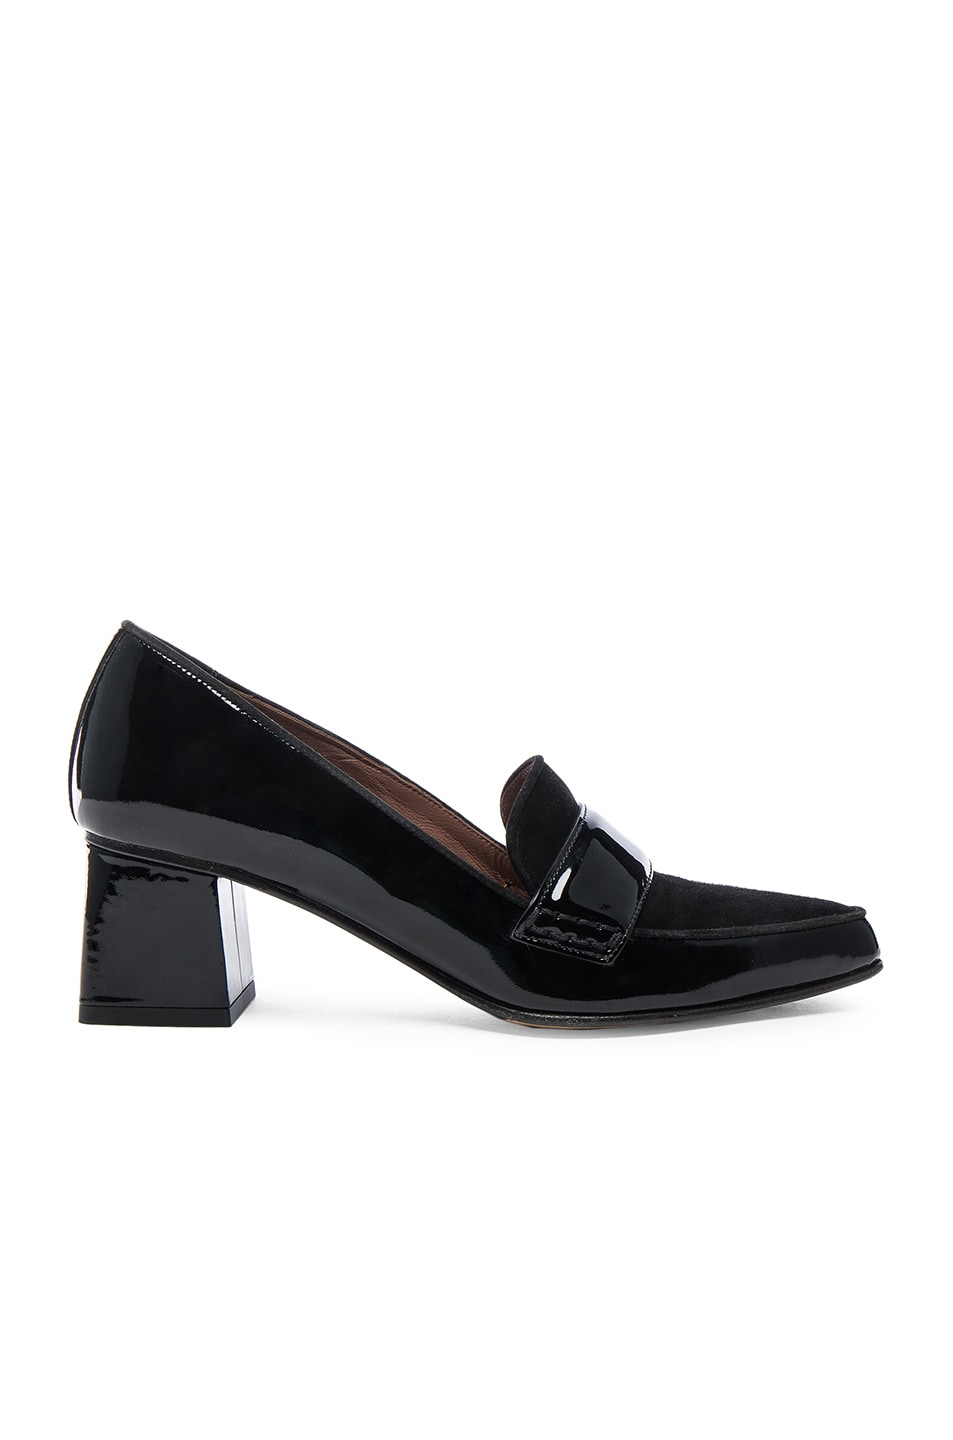 Image 1 of Tabitha Simmons Patent Leather Margot Heels in Black Patent & Suede